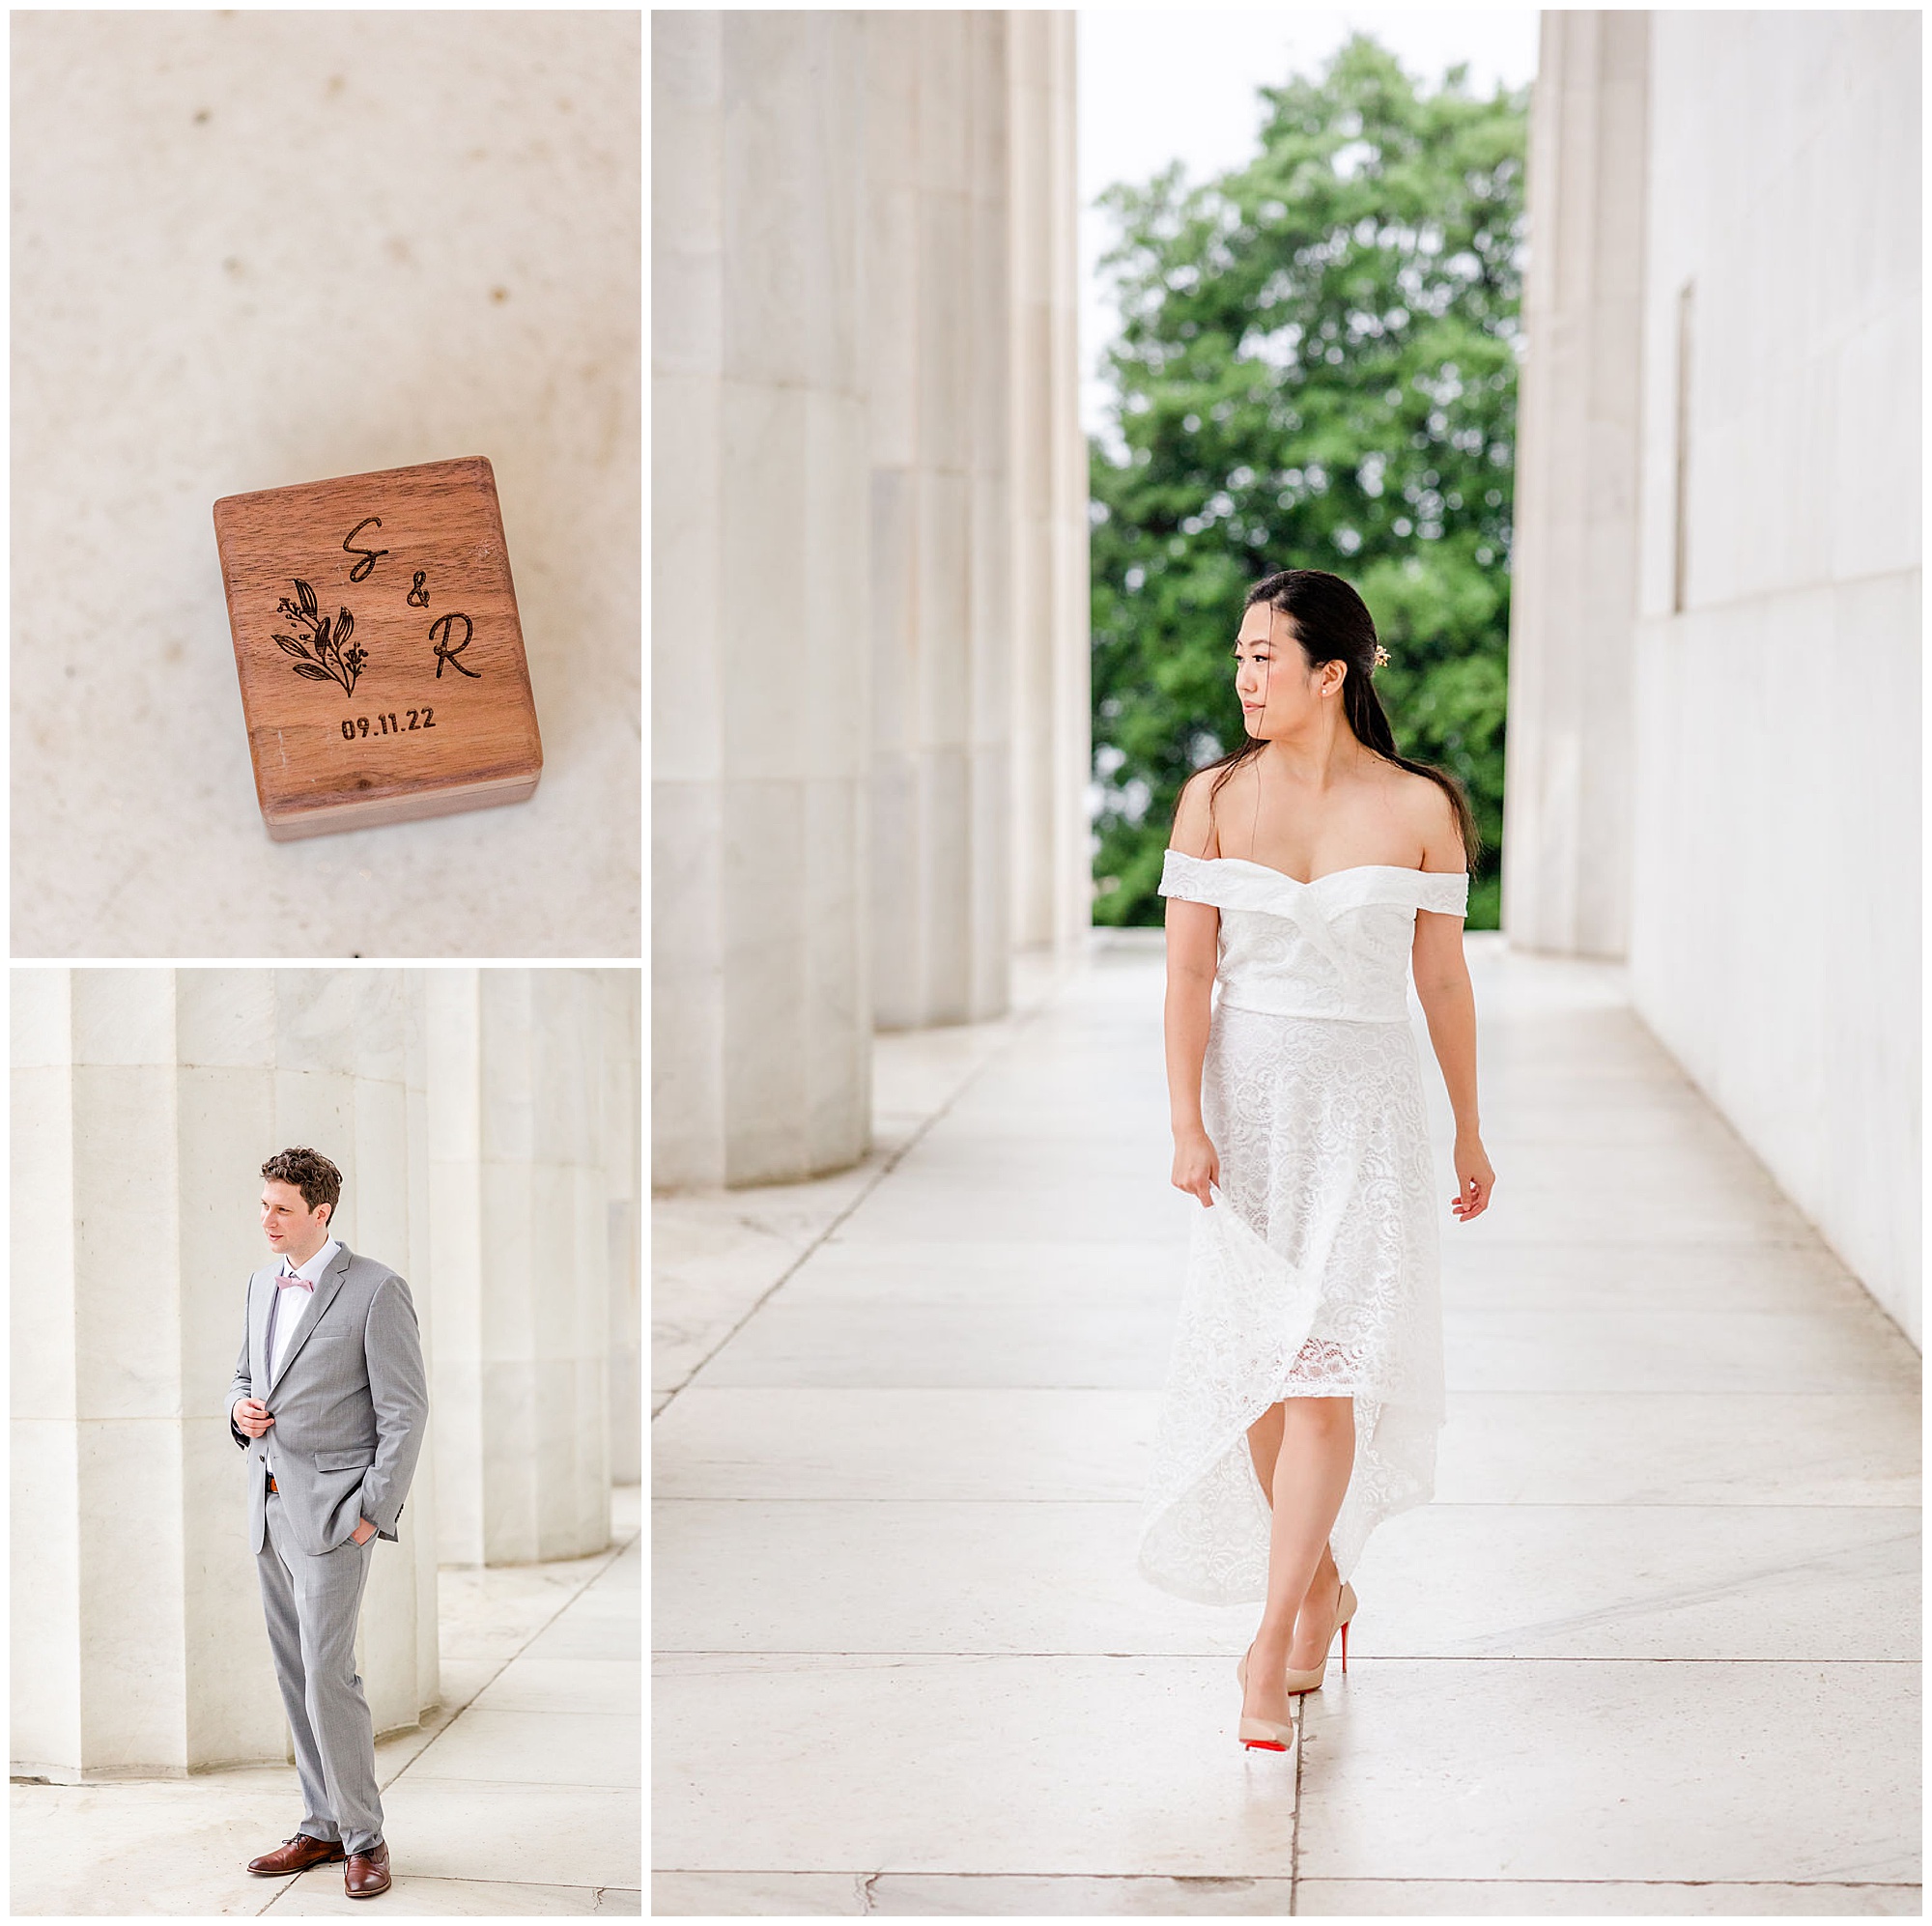 sunrise and sunset DC wedding, DC wedding photos, DC wedding portraits, micro-wedding, DC micro-wedding photography, DC micro-wedding photographer, DC petite wedding photographer, northern Virginia wedding photography, natural light wedding photography, unique wedding, Rachel E.H. Photography, wooden engraved box, groom with hands in pockets, bride walking towards camera, bride looking into distance